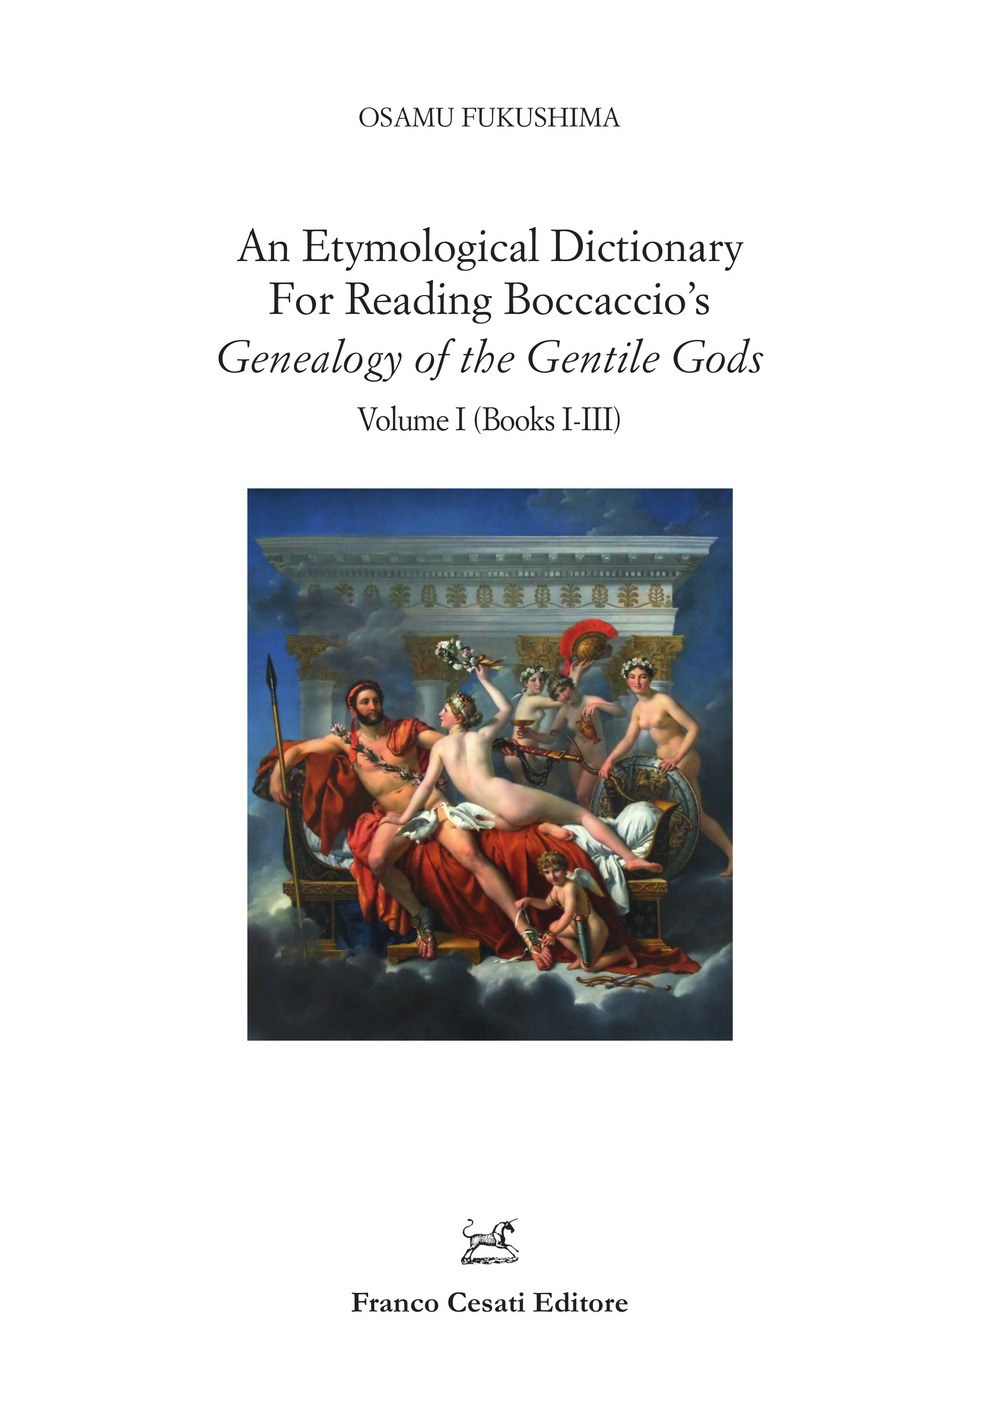 An etymological dictionary for reading Boccaccio's «Genealogy of the gentile gods». Vol. 1: Books I-III